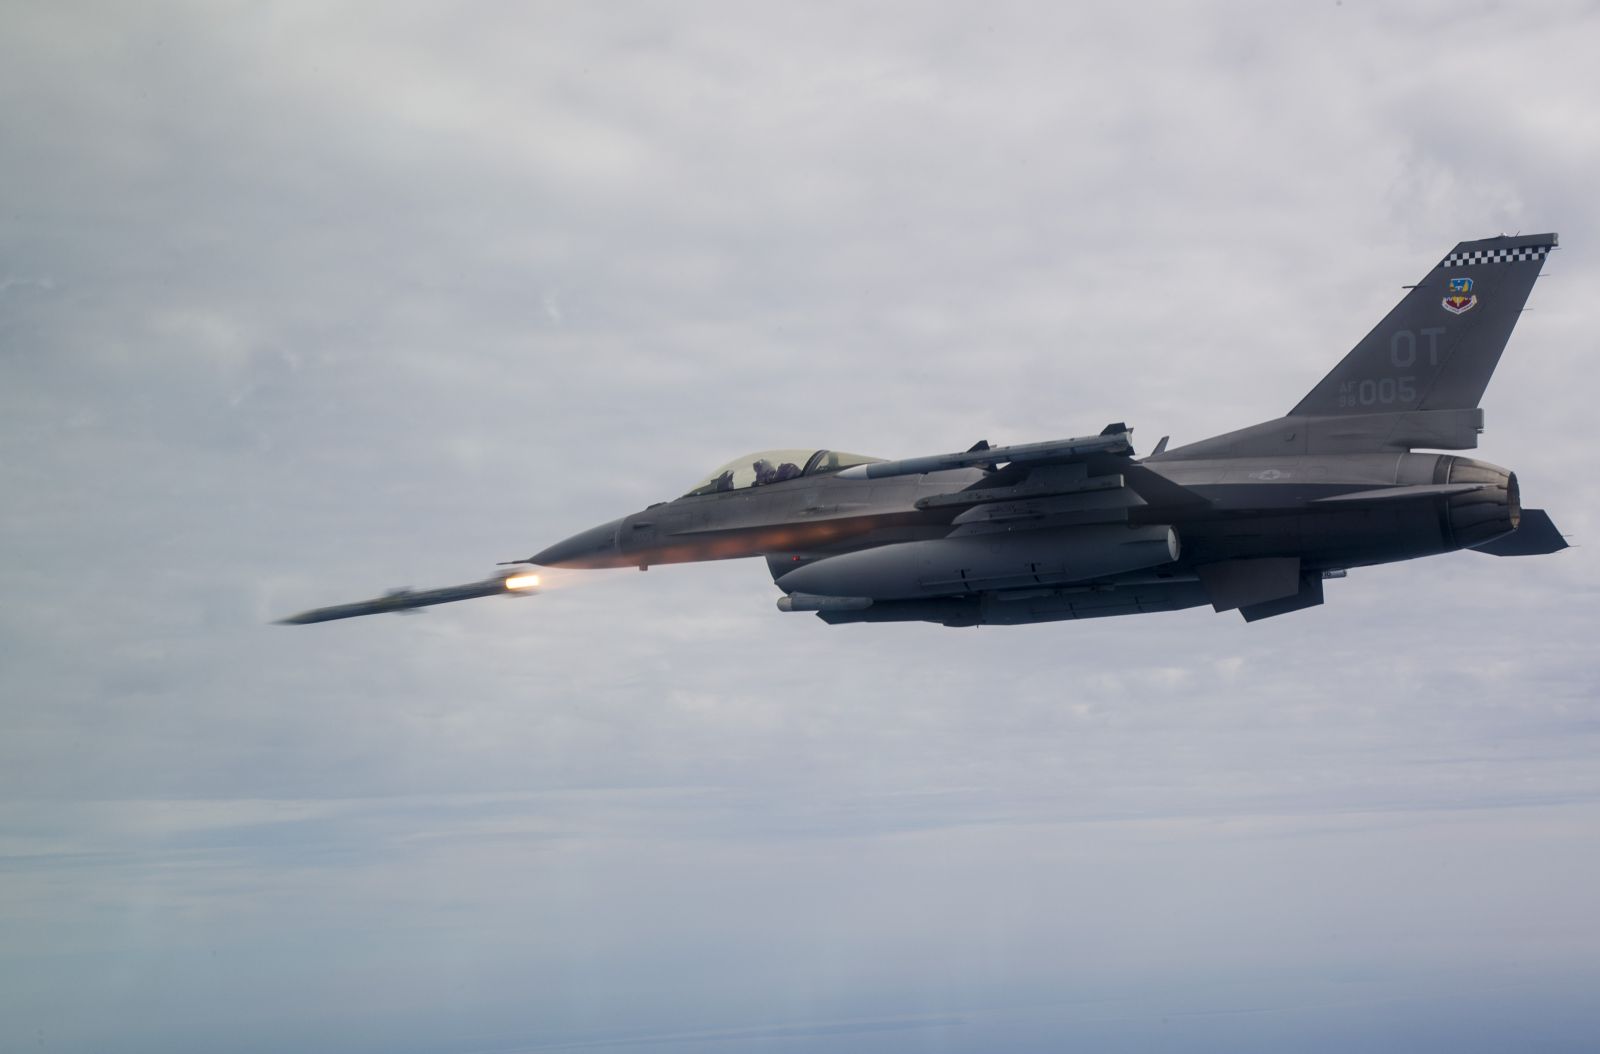 Most F-16 depots are government-owned and located on Air Force bases. (Photo/Provided)